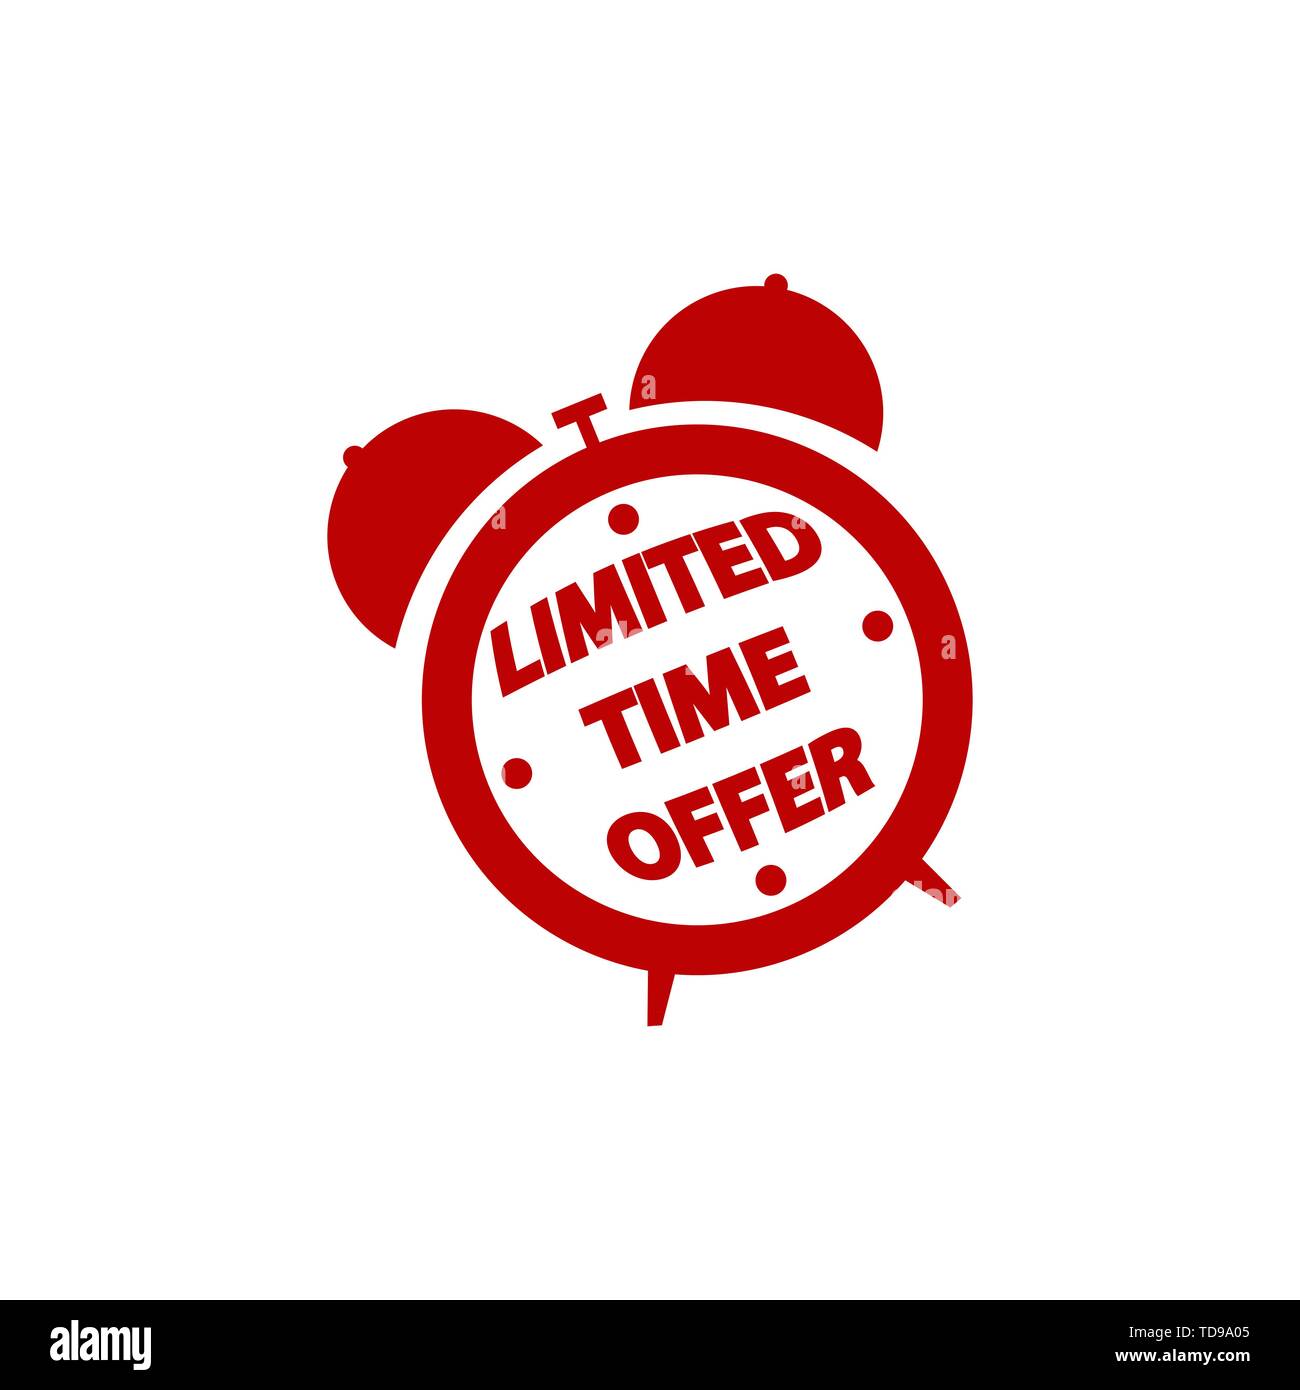 Limited time offer icon sign. vector eps10 Stock Vector Image